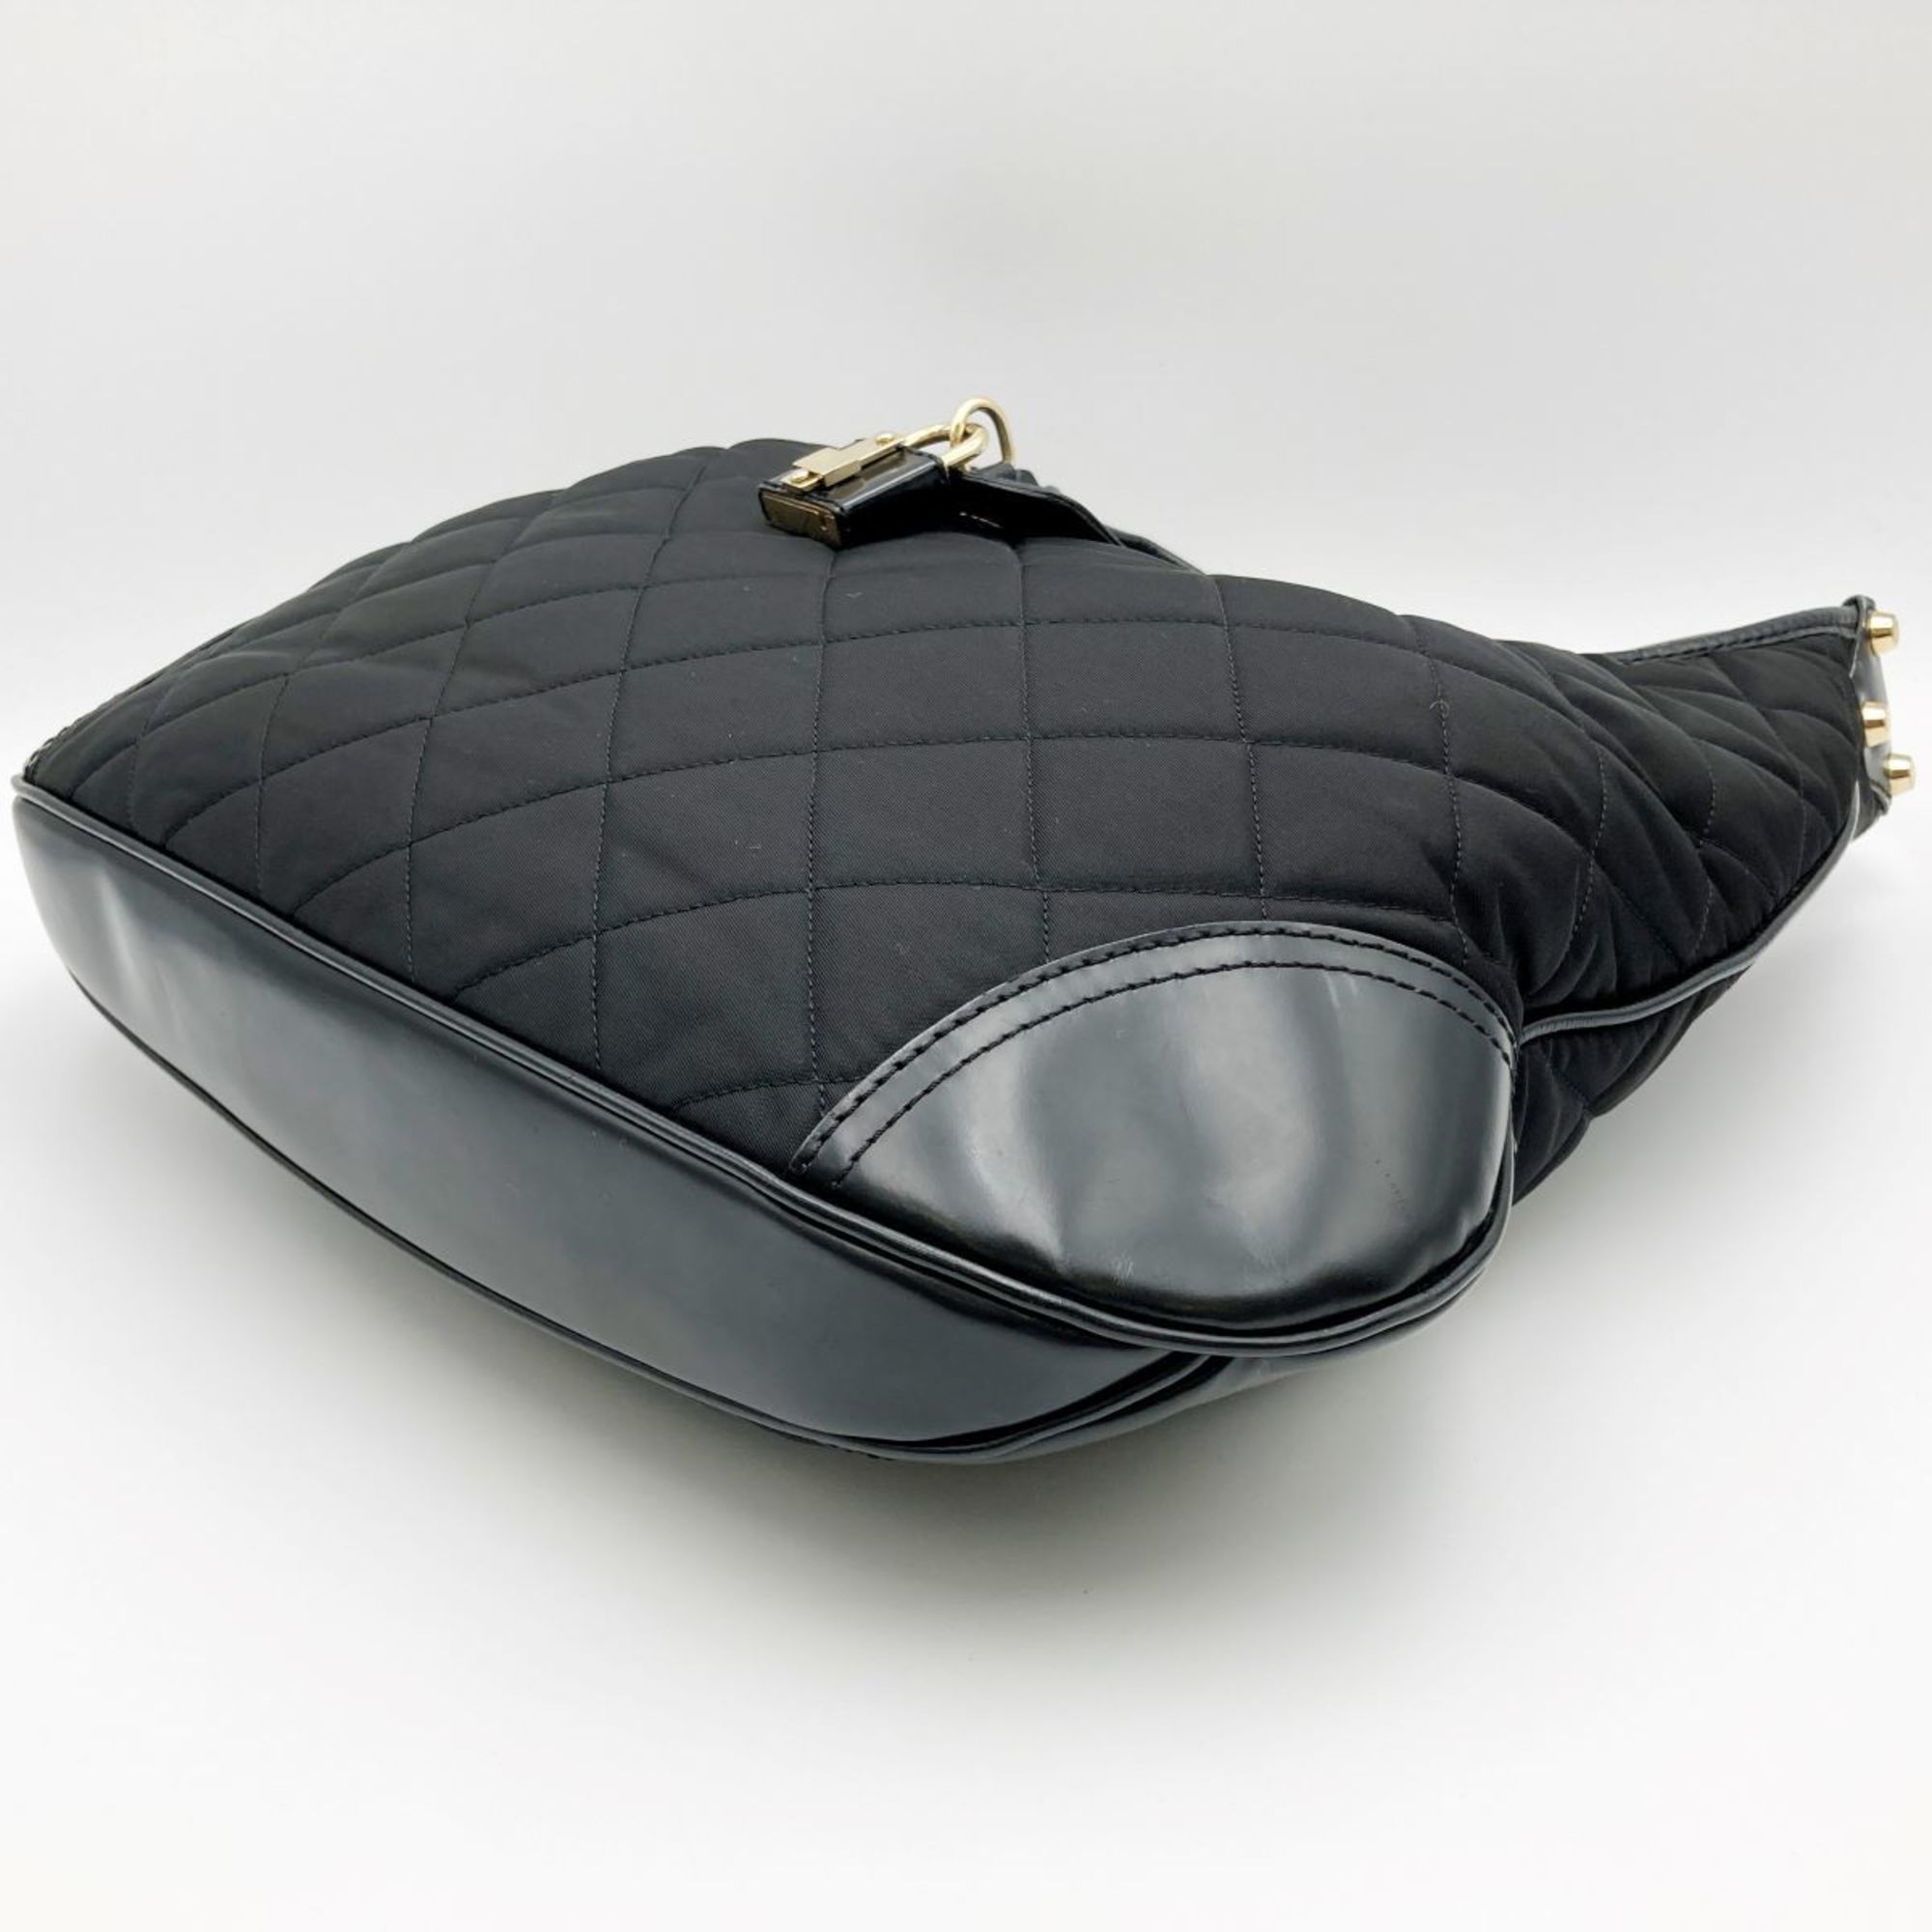 BURBERRY Shoulder Bag Hobo Quilted Black Nylon Leather Ladies